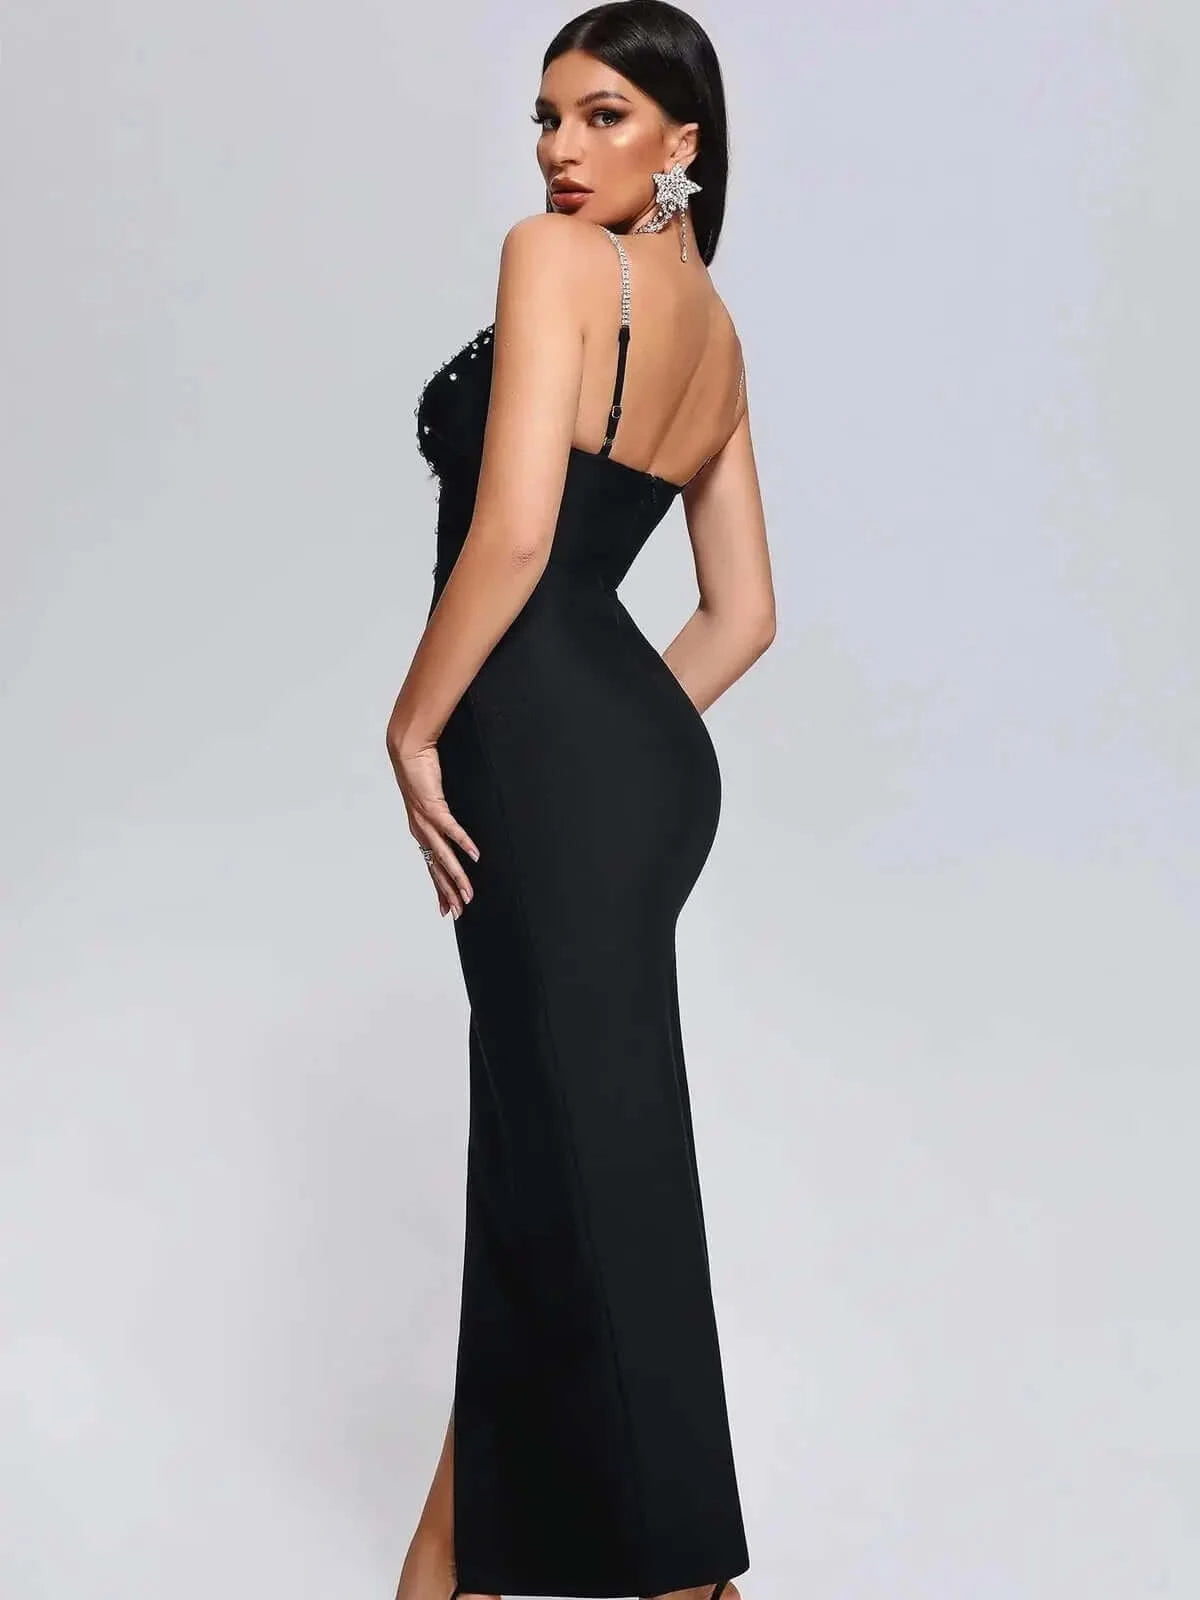 Elegant evening dress adorned with shimmering crystals for a touch of glamour